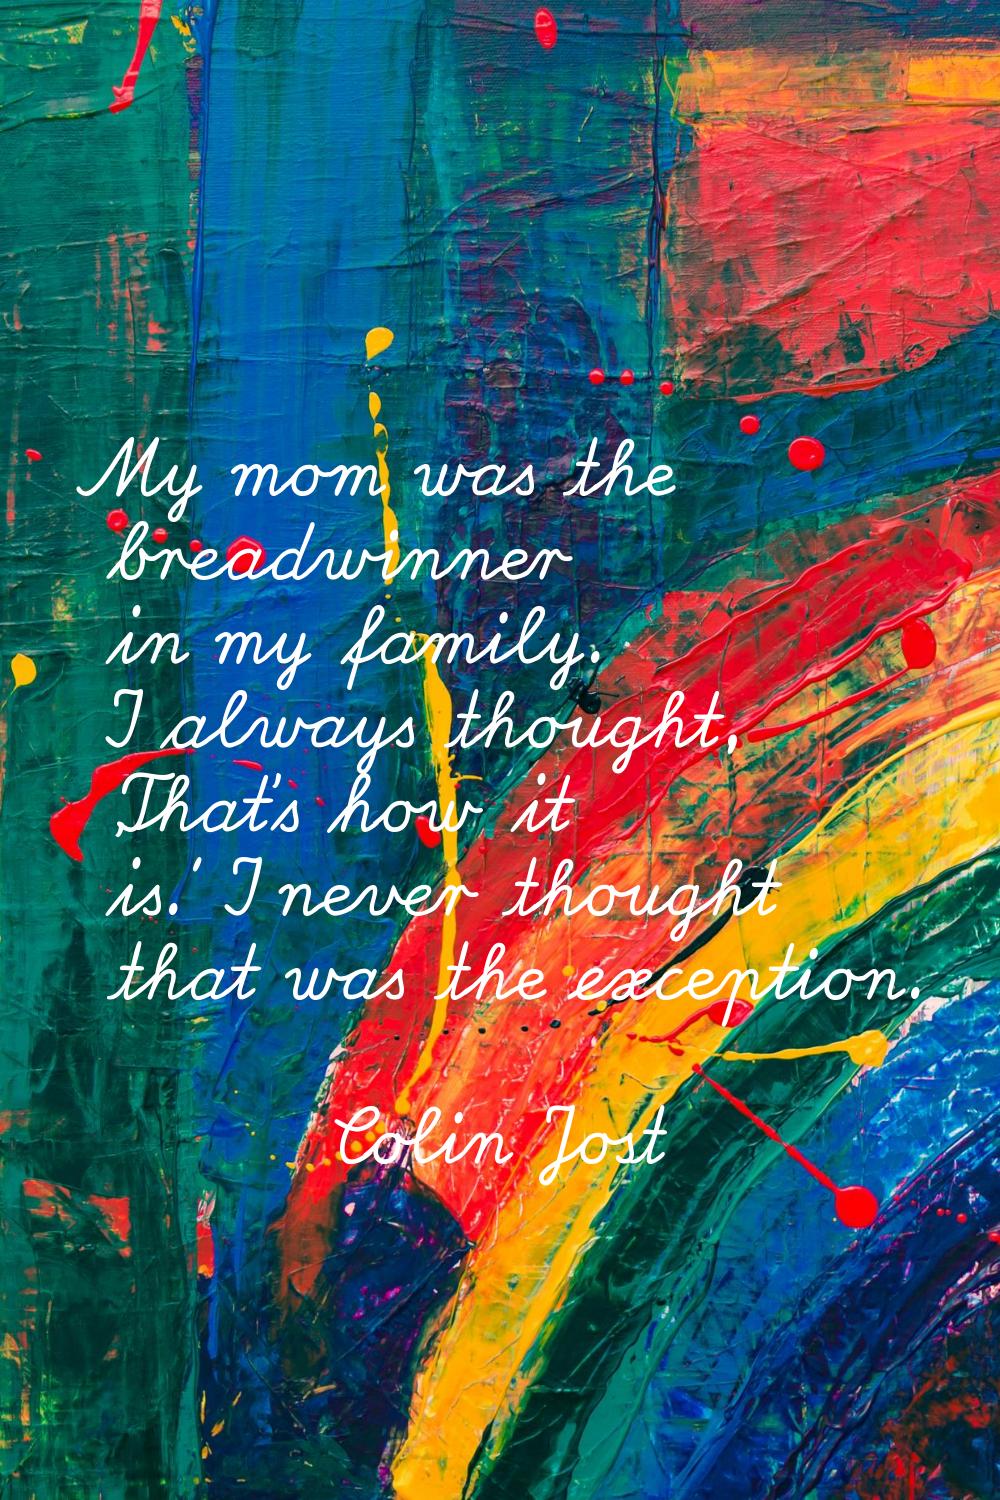 My mom was the breadwinner in my family. I always thought, 'That's how it is.' I never thought that